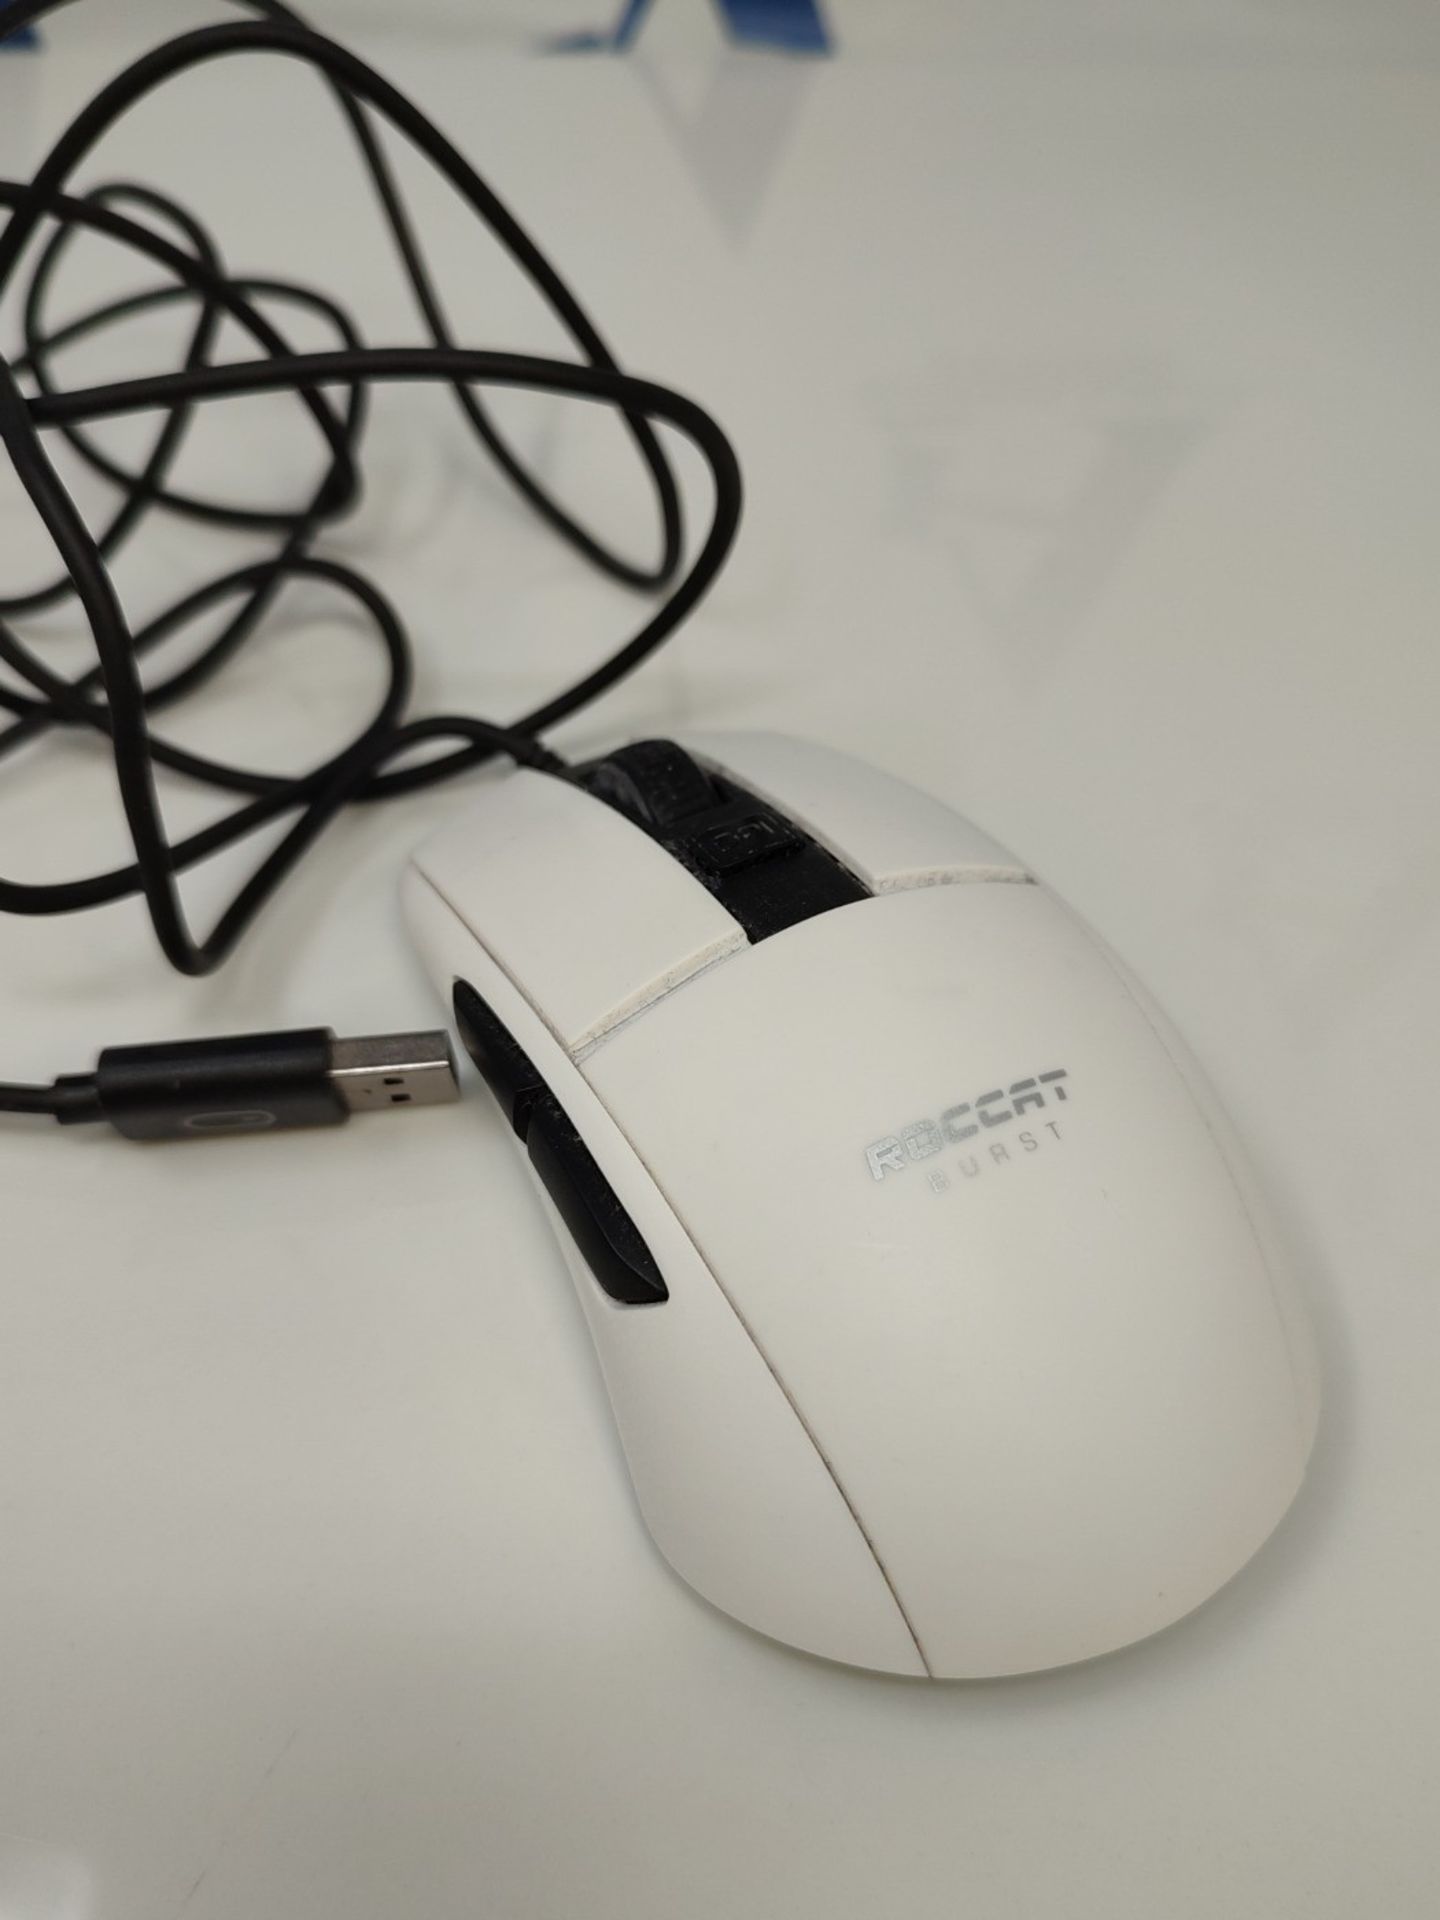 Roccat Burst - Extremely lightweight Optical Core Gaming Mouse (high precision, optica - Image 2 of 3